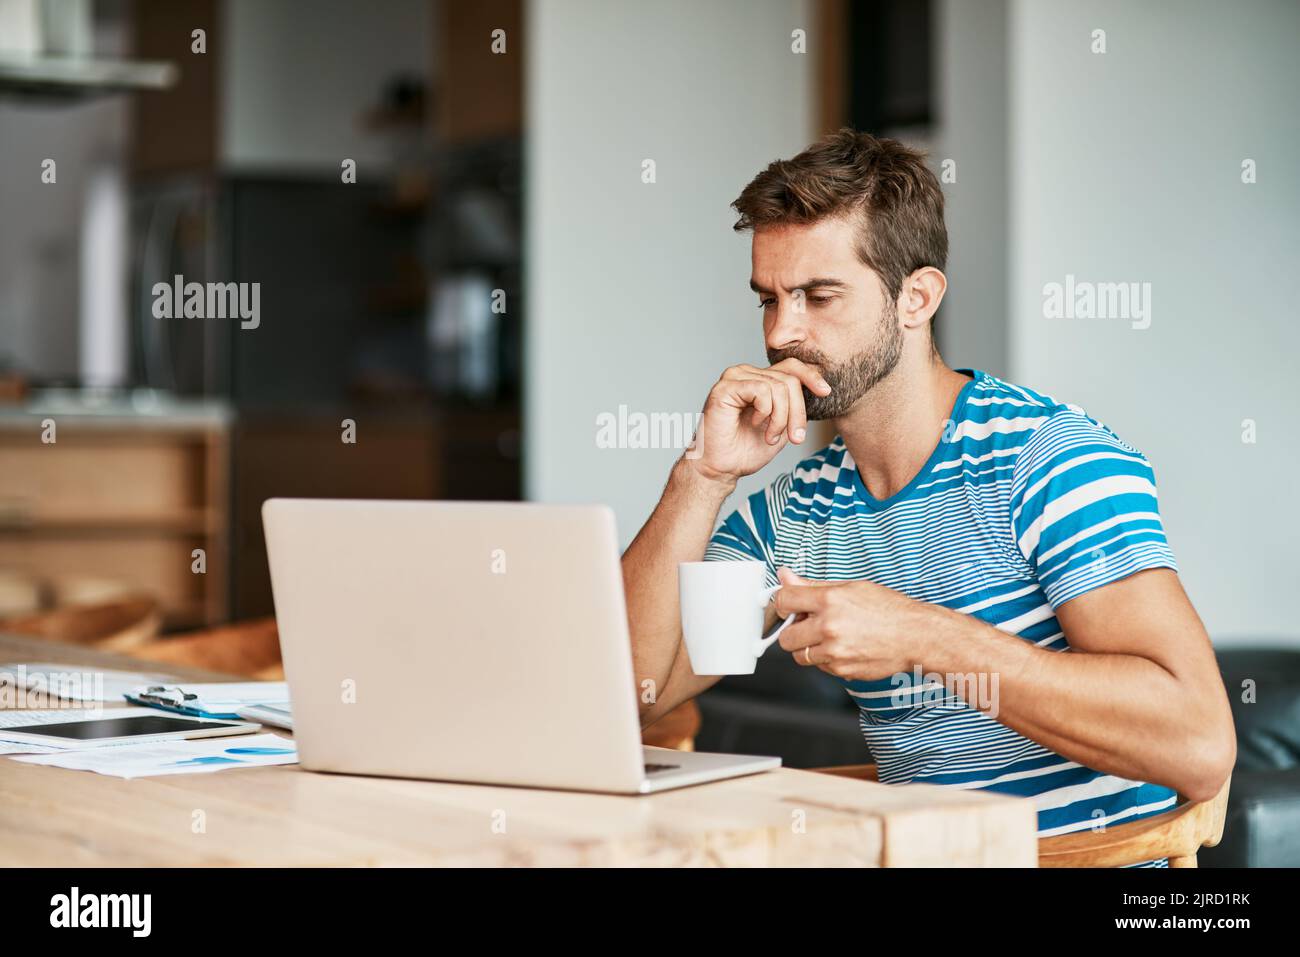 Hes got a lot to think about it. a handsome young male entrepreneur looking thoughtful while working from his home office. Stock Photo